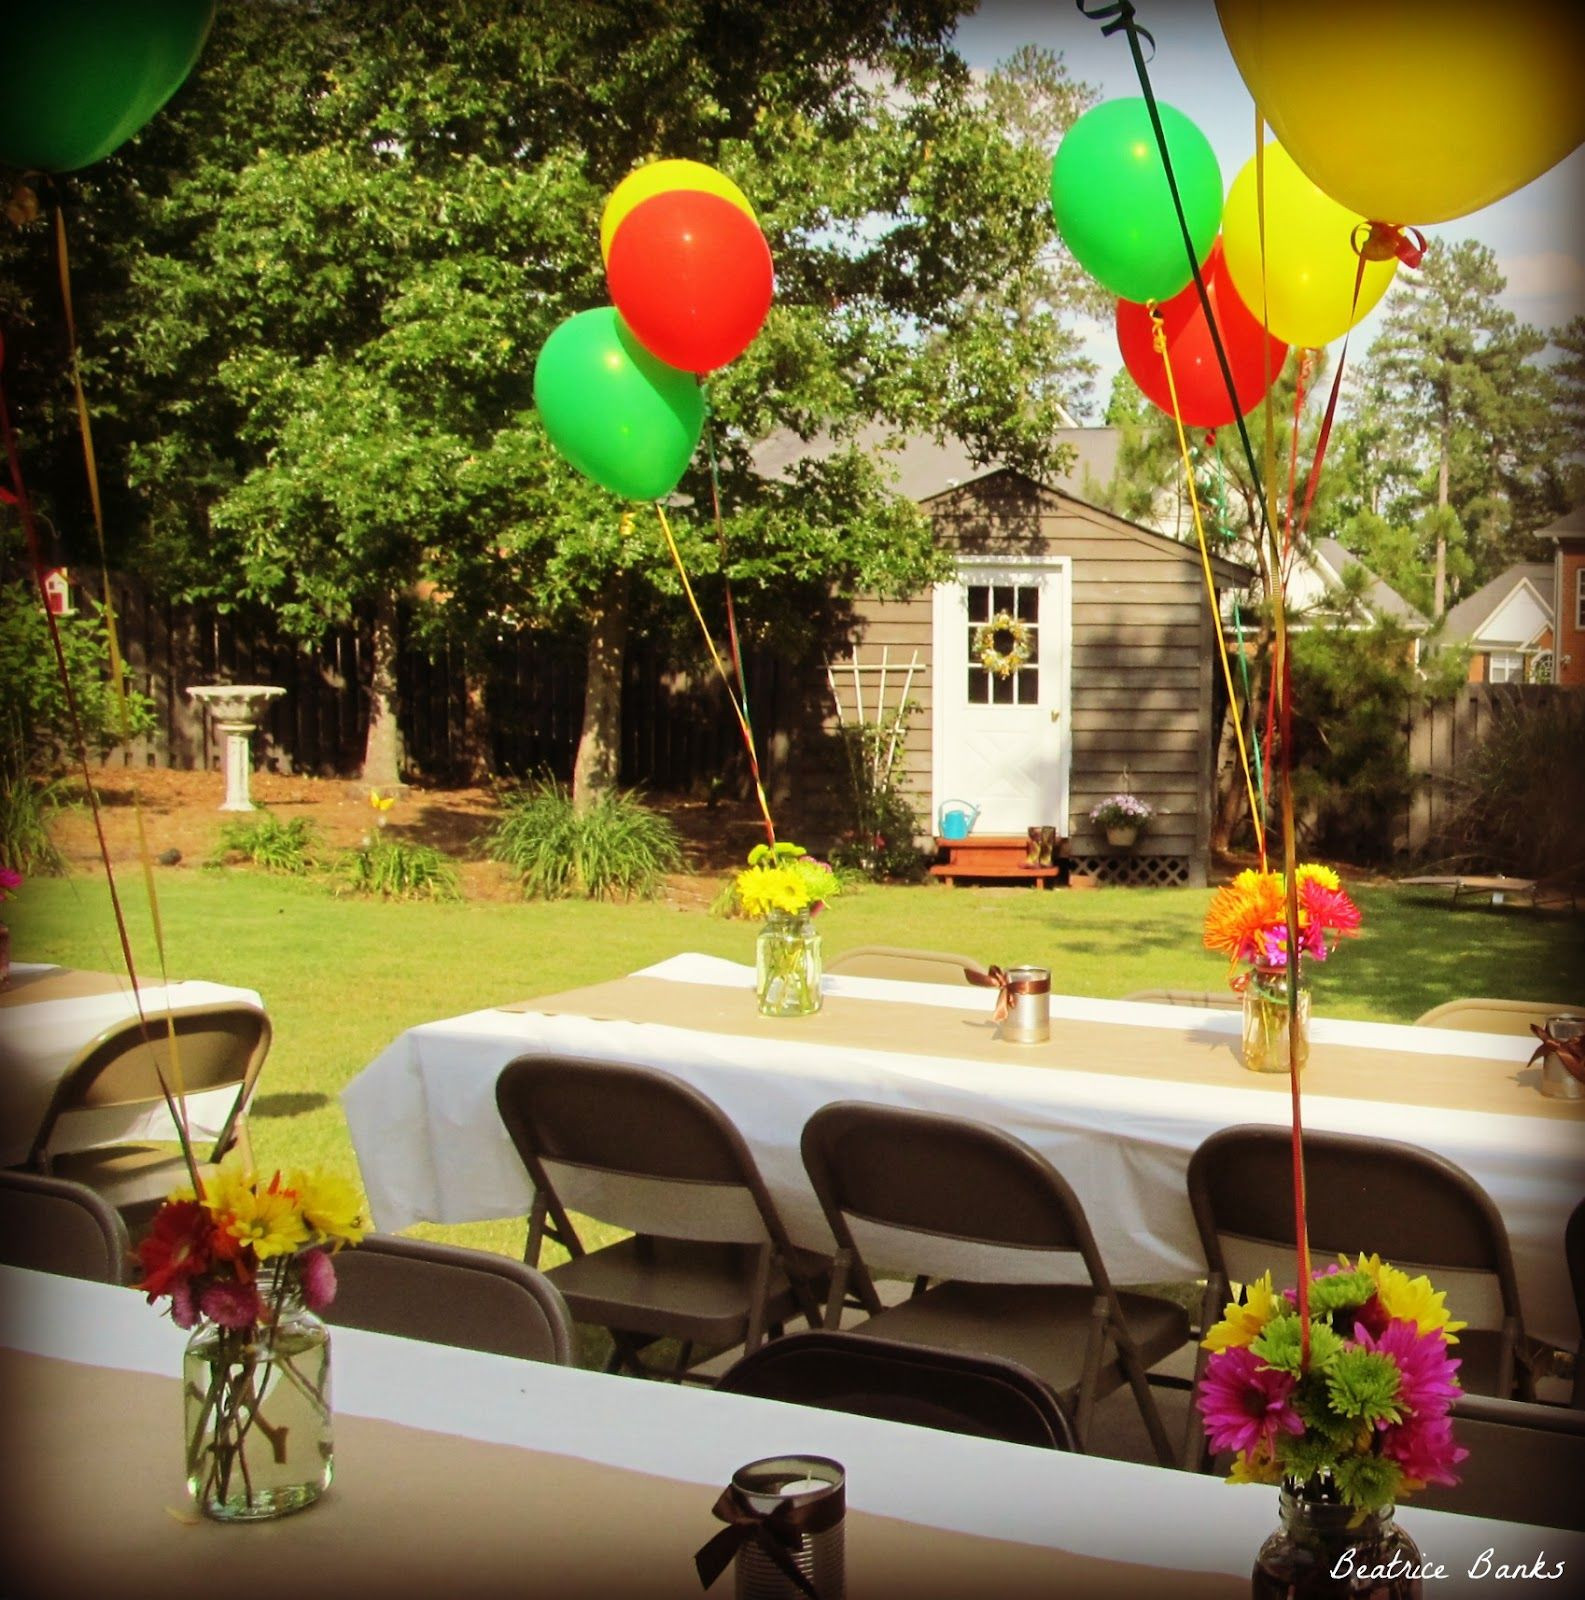 Backyard College Graduation Party Ideas
 Backyard Graduation Party Beatrice Banks With images